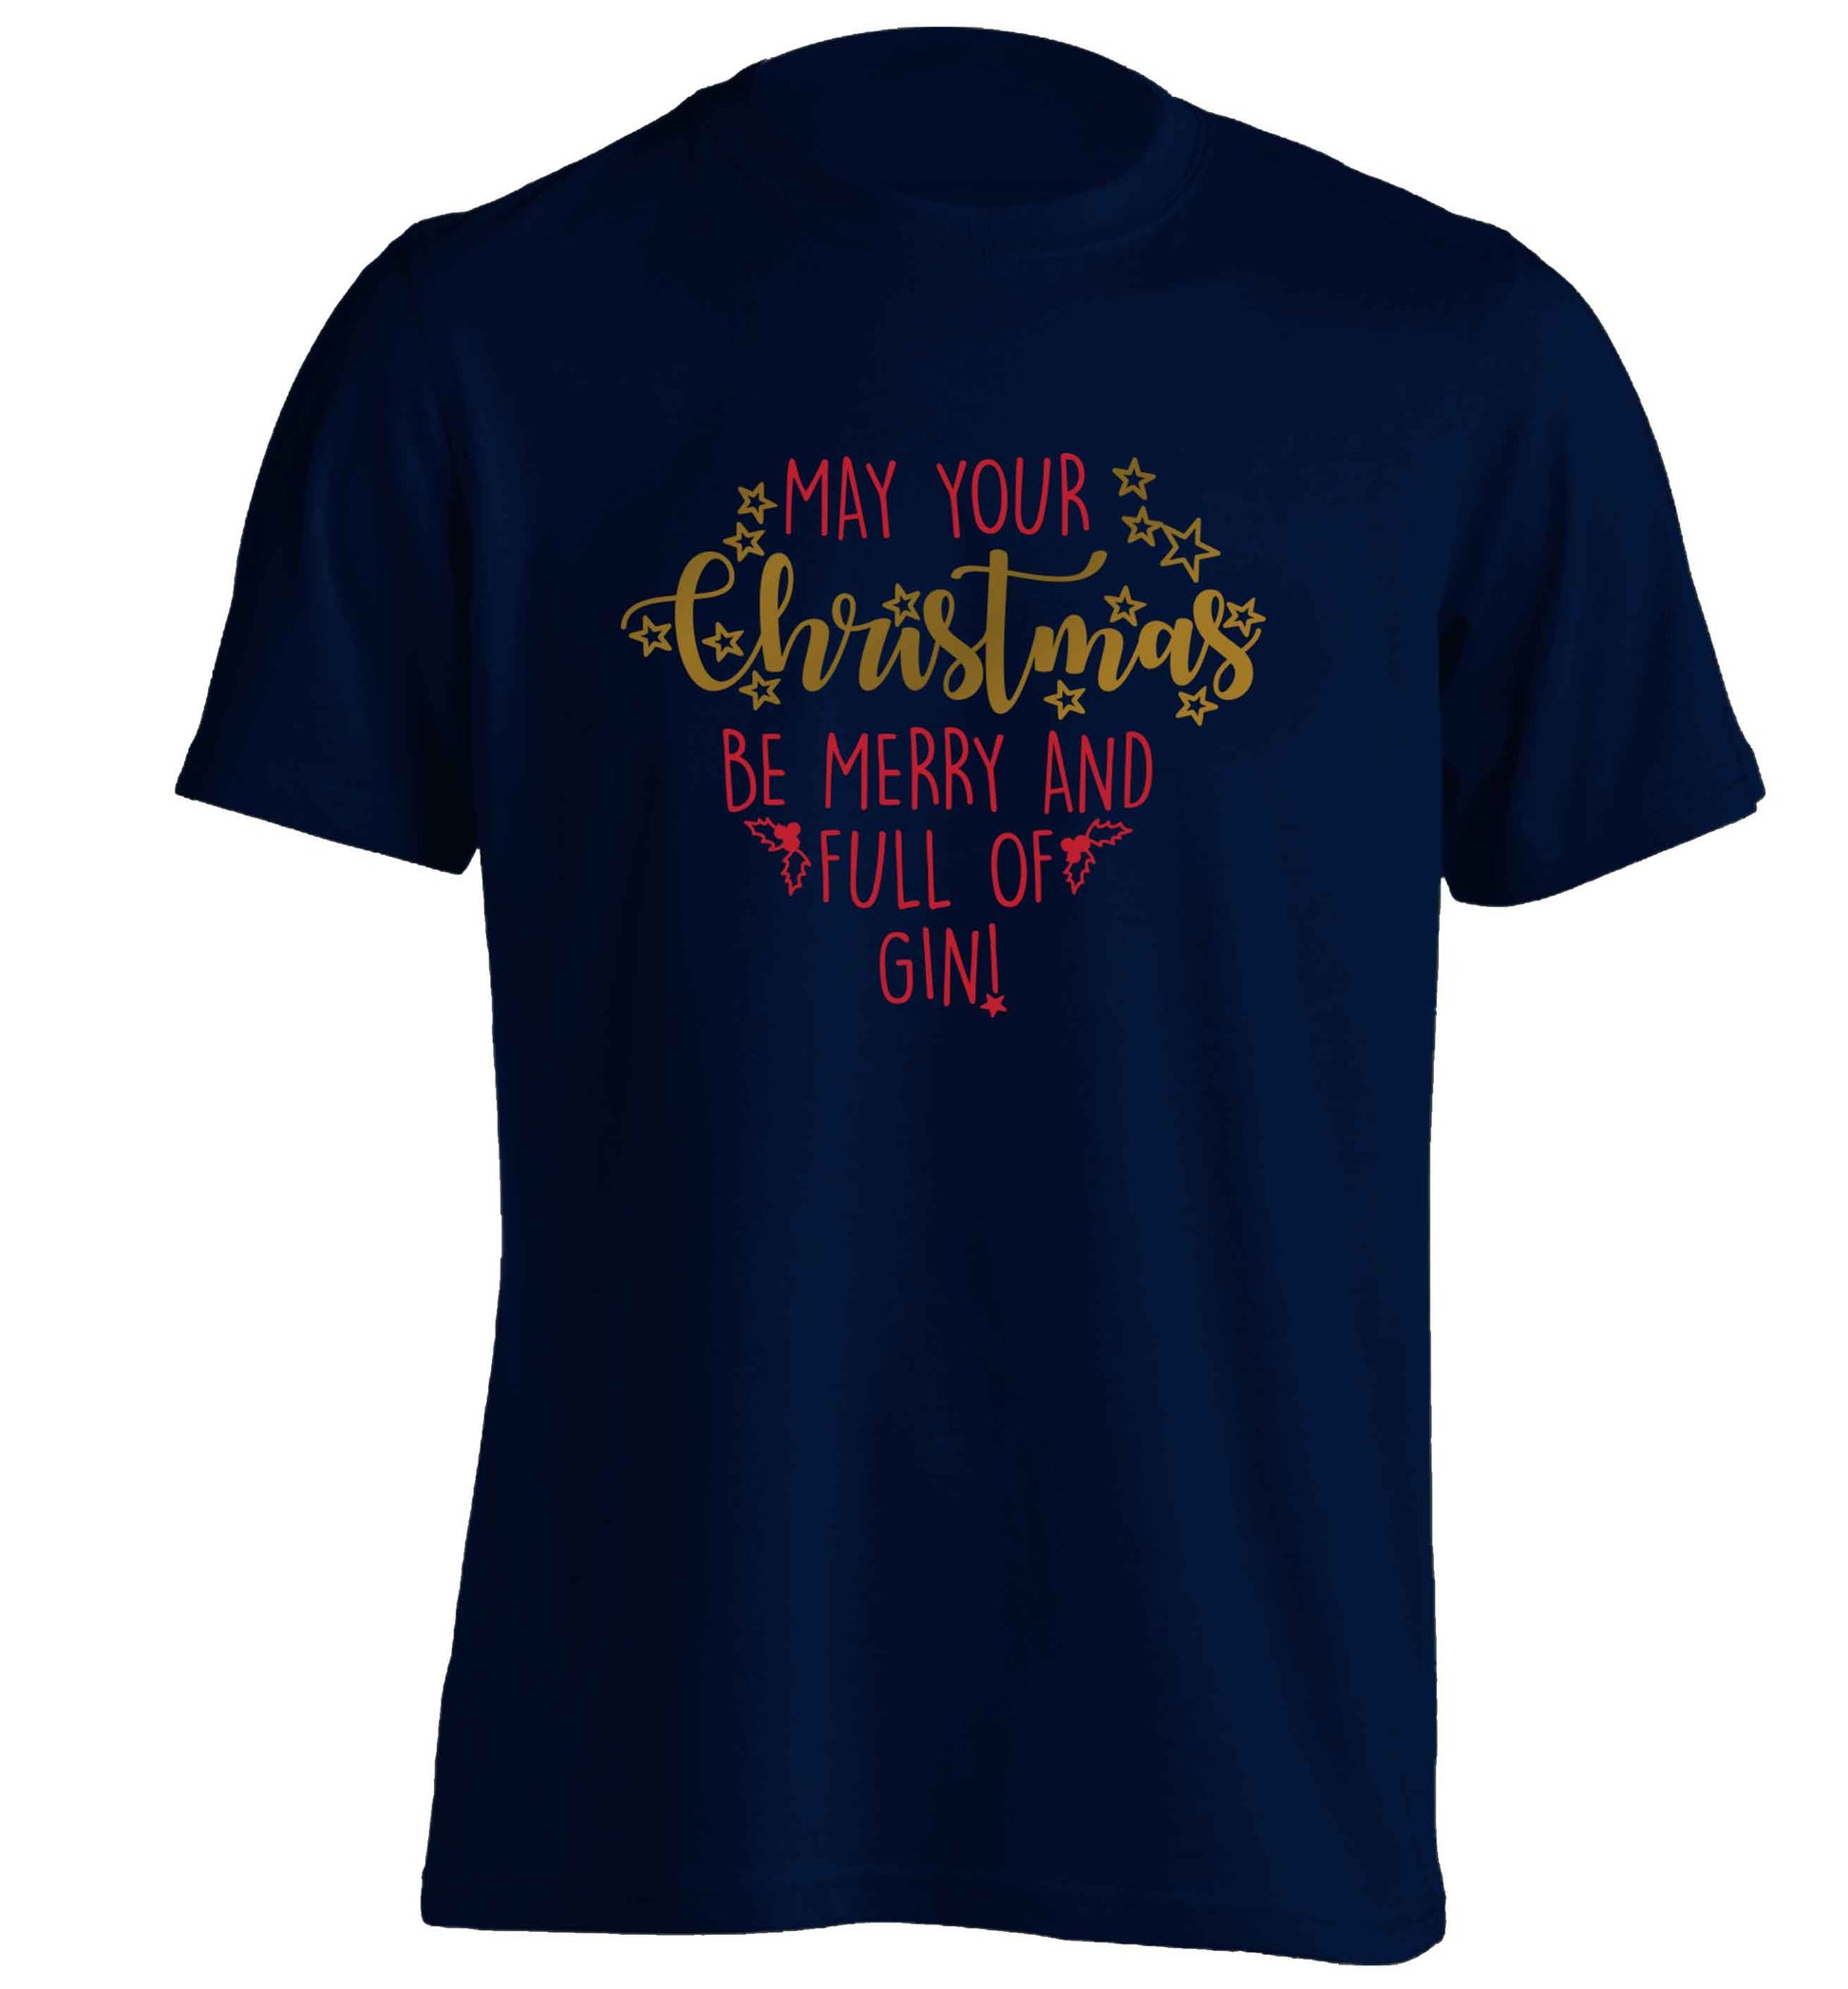 May your Christmas be merry and full of gin adults unisex navy Tshirt 2XL